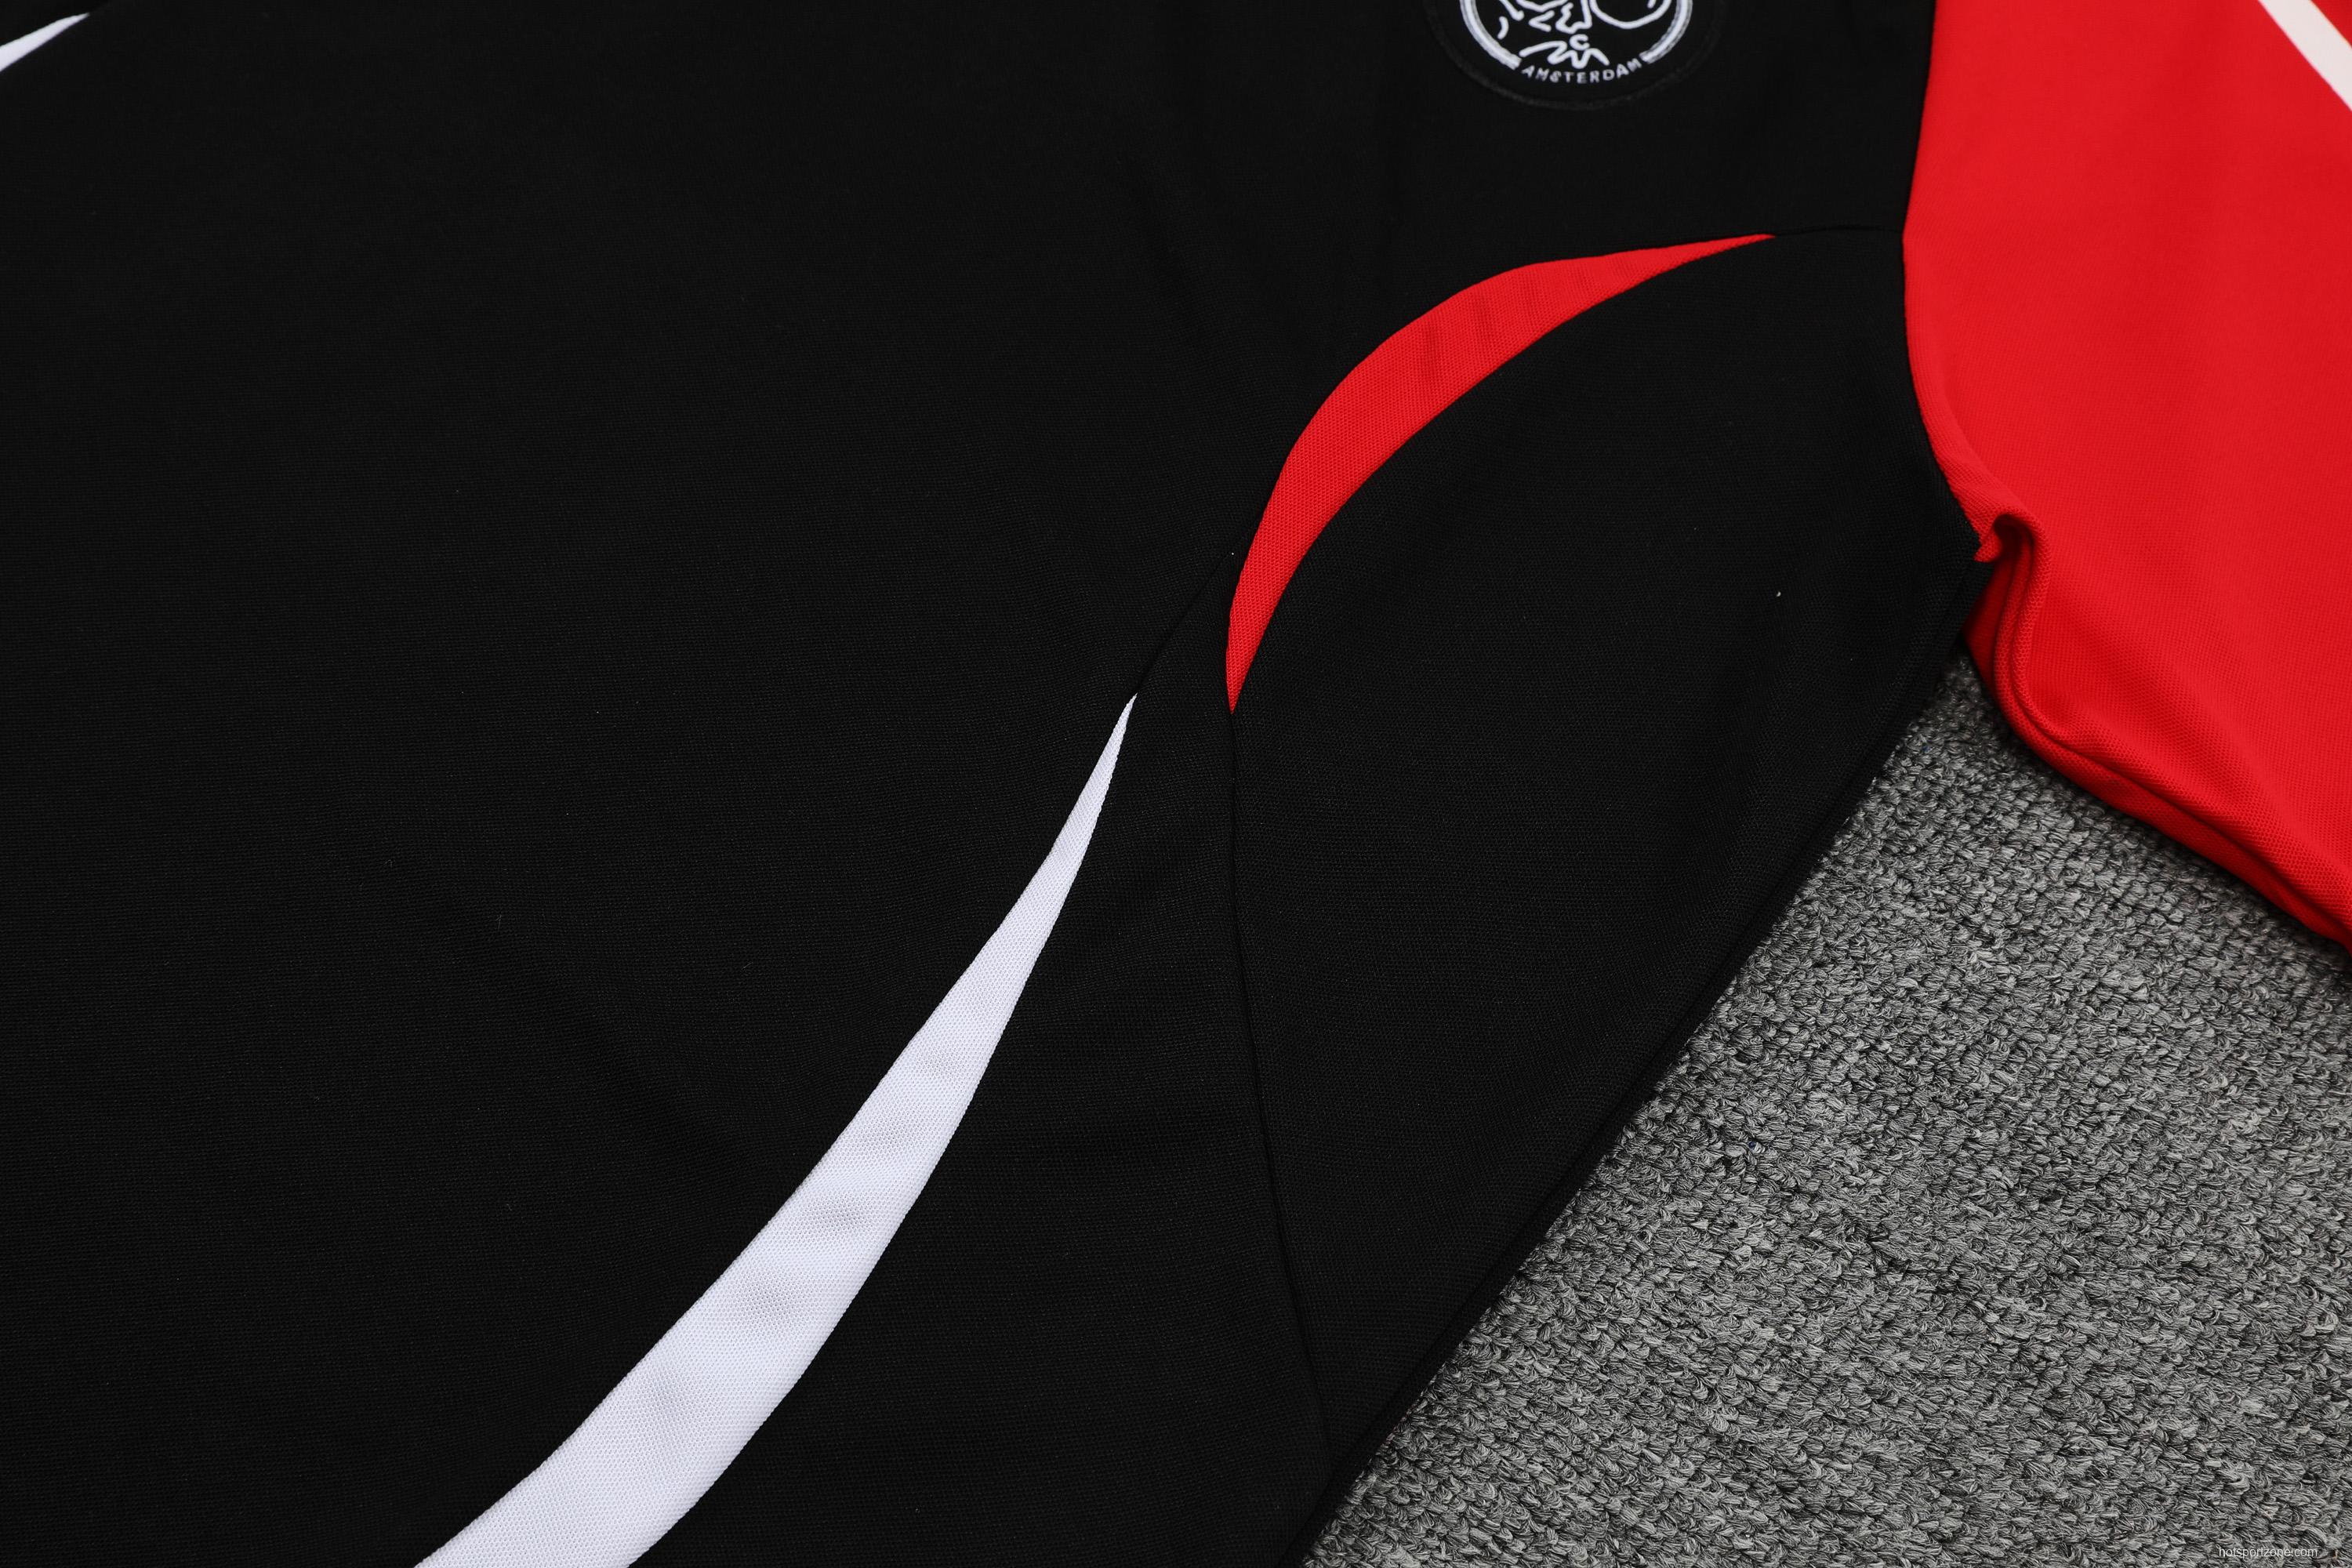 Ajax POLO kit black (not sold separately)